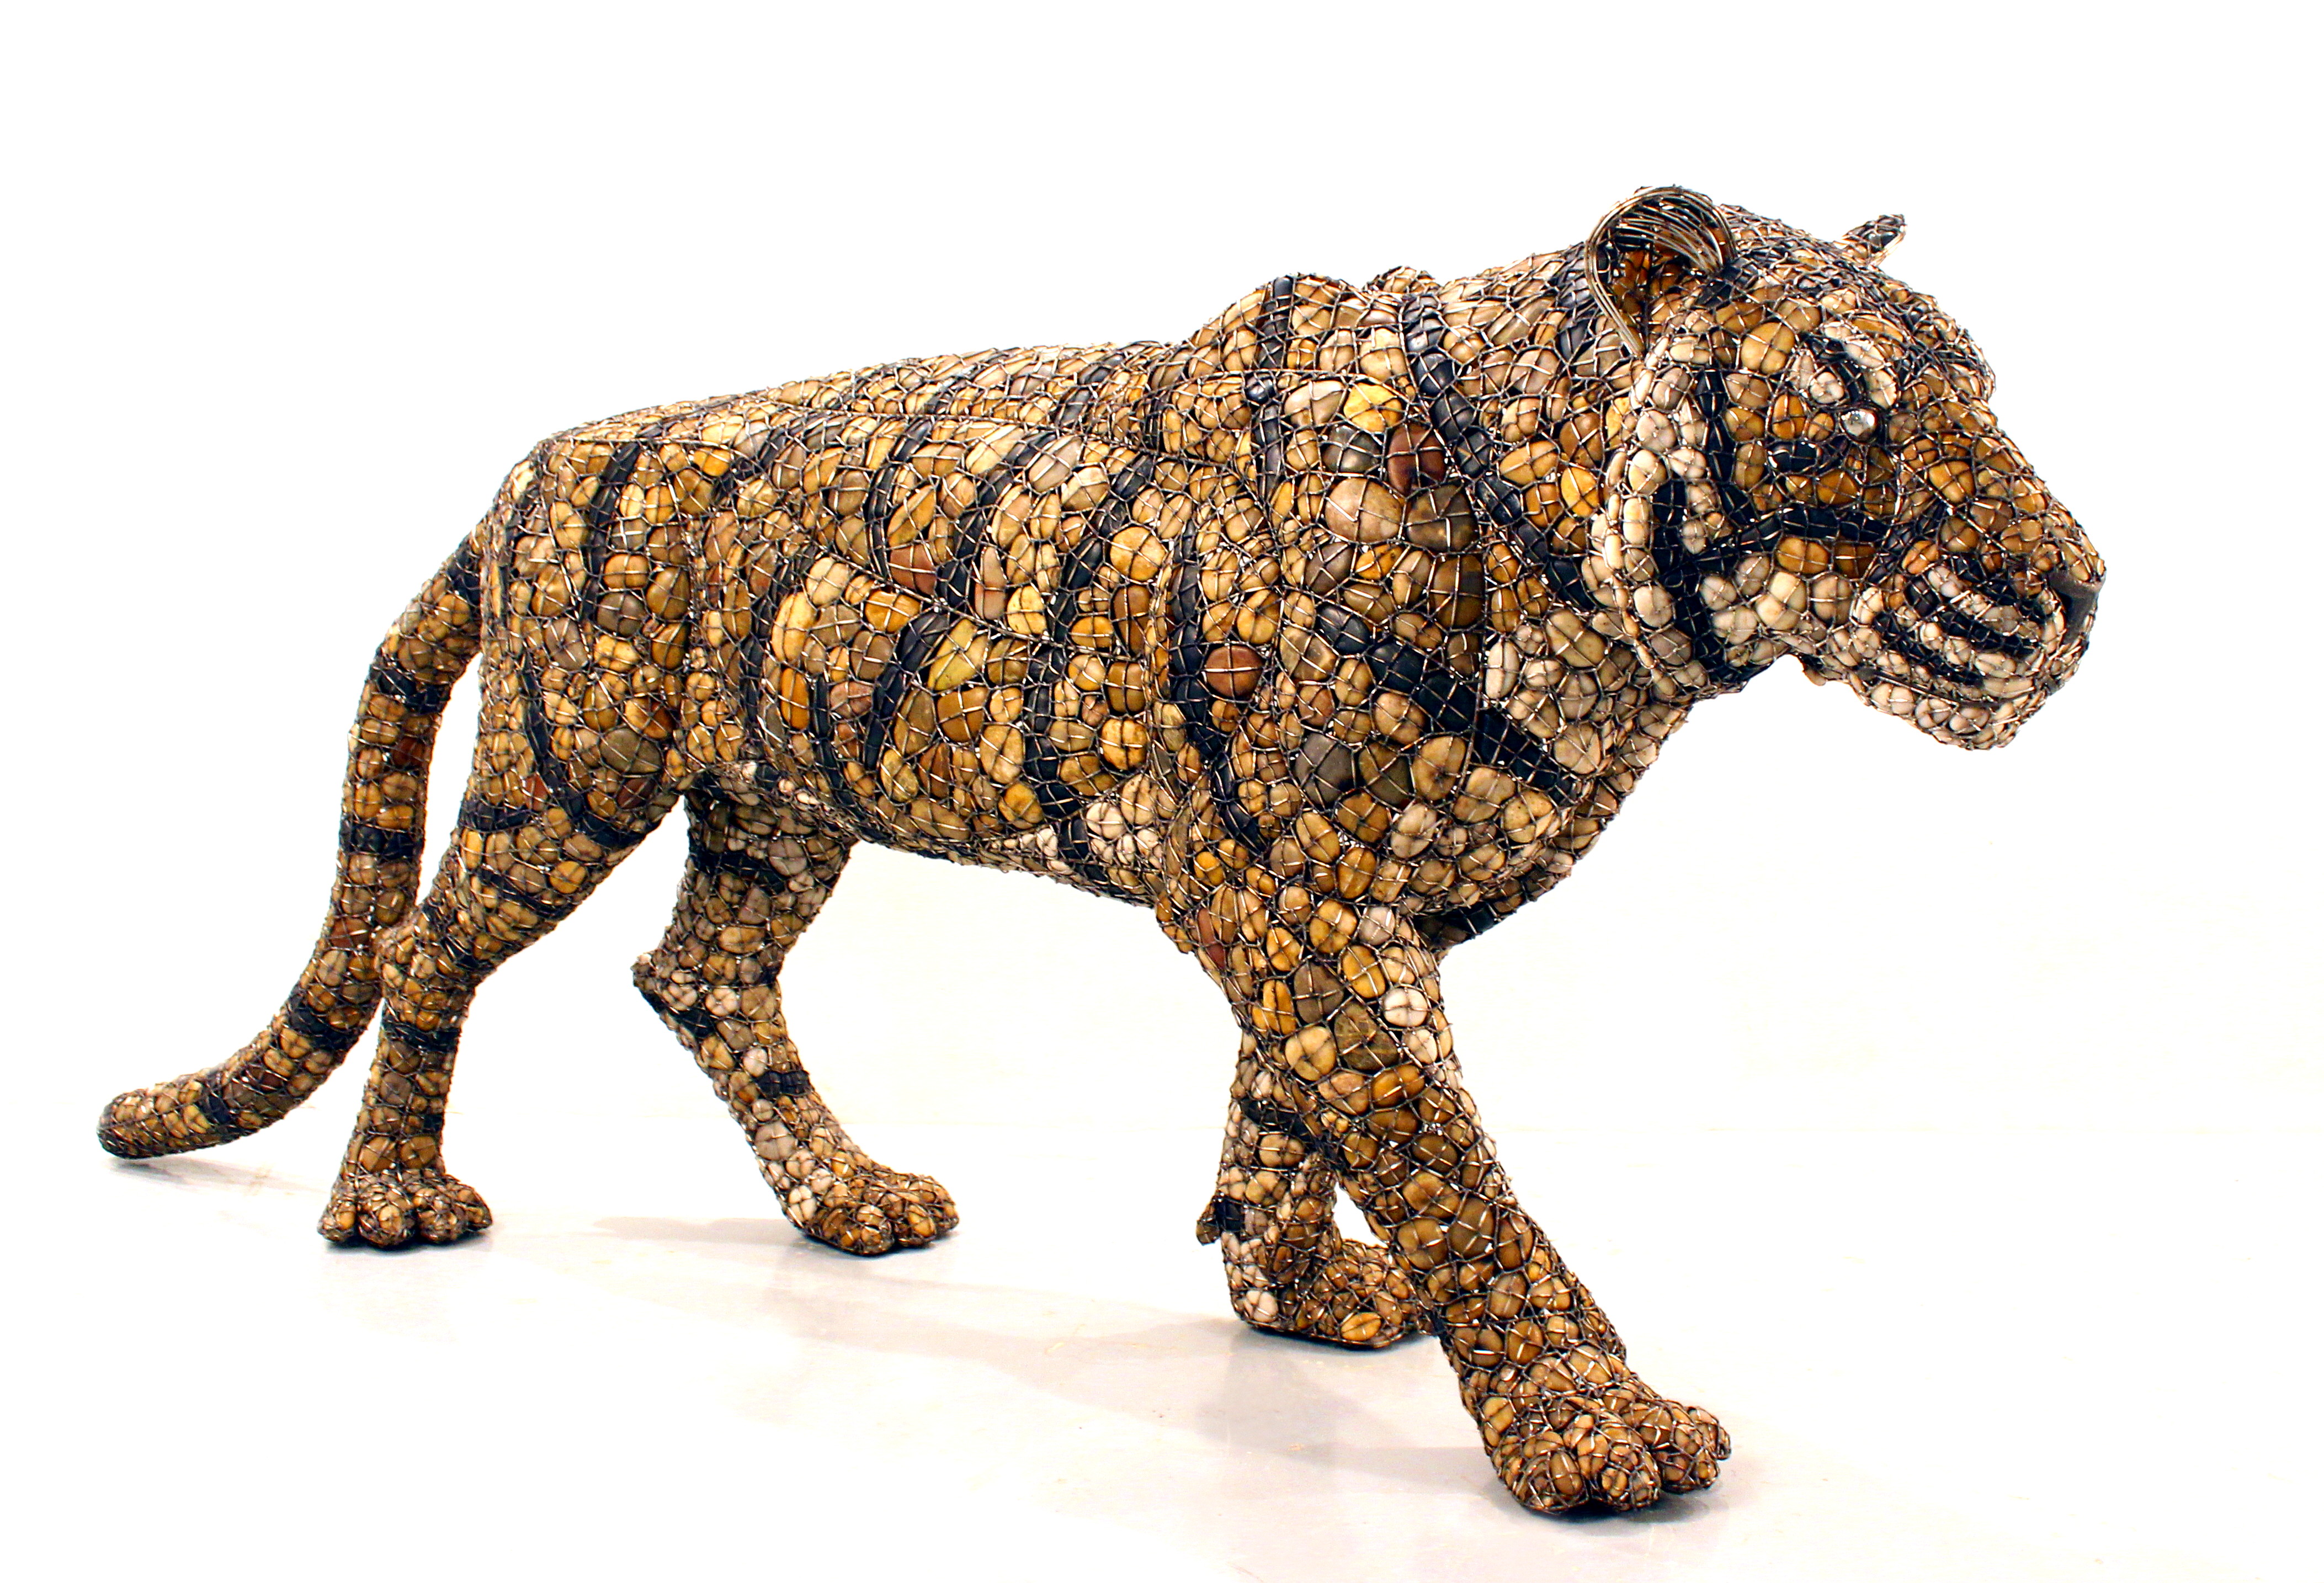 Enclosed Animal-Tiger 320X75X138 Cm stainless steel, stone 2017 (2).JPG